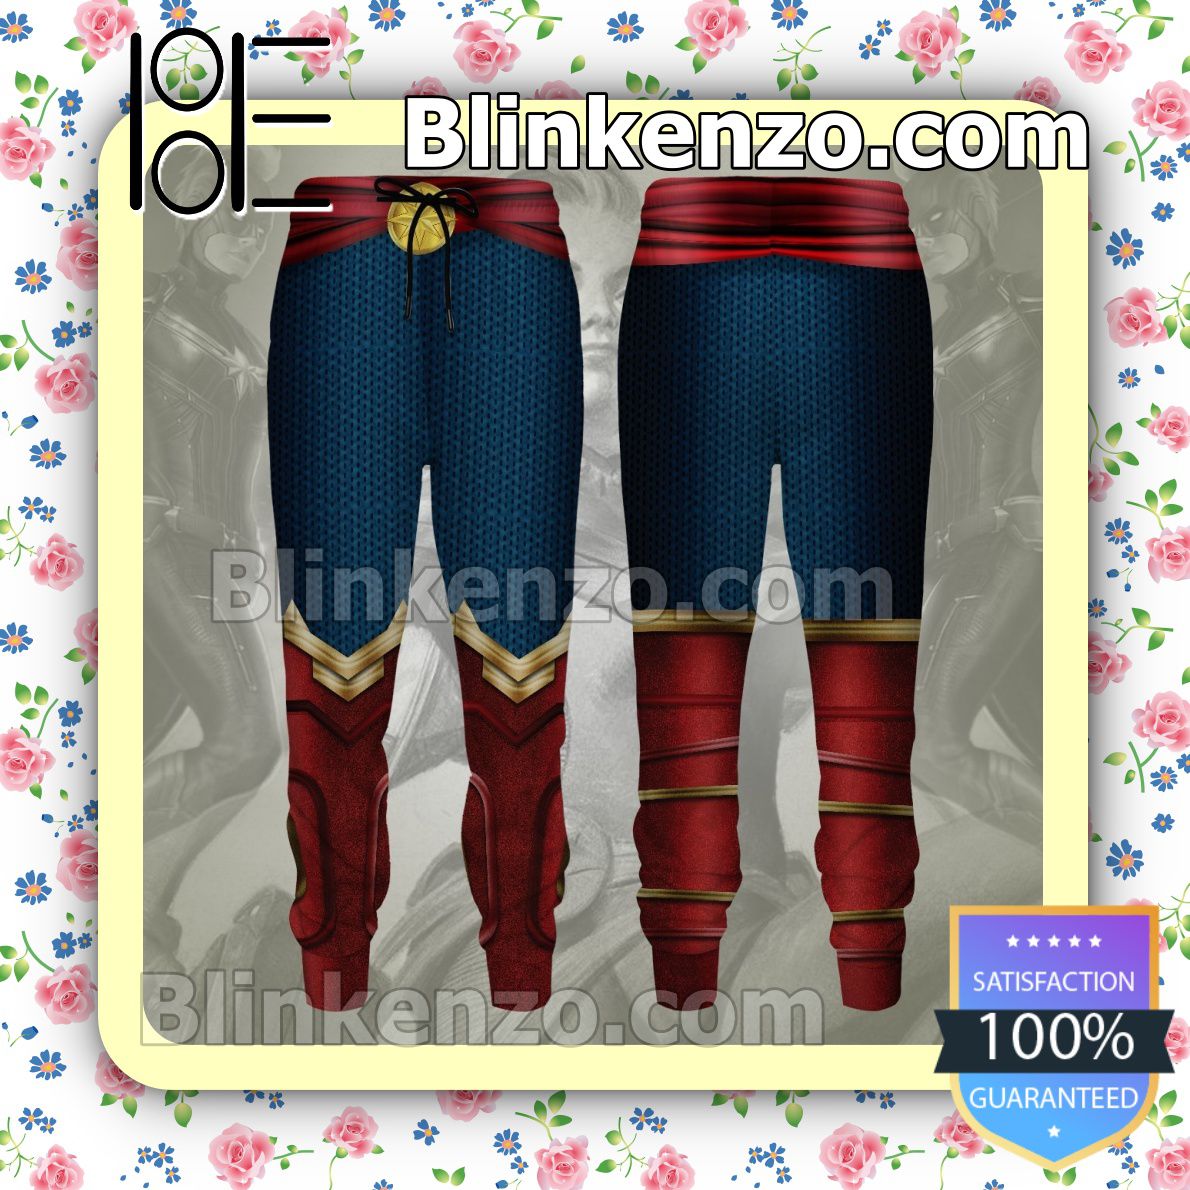 Perfect Carol Danvers Captain Marvel Gift For Family Joggers